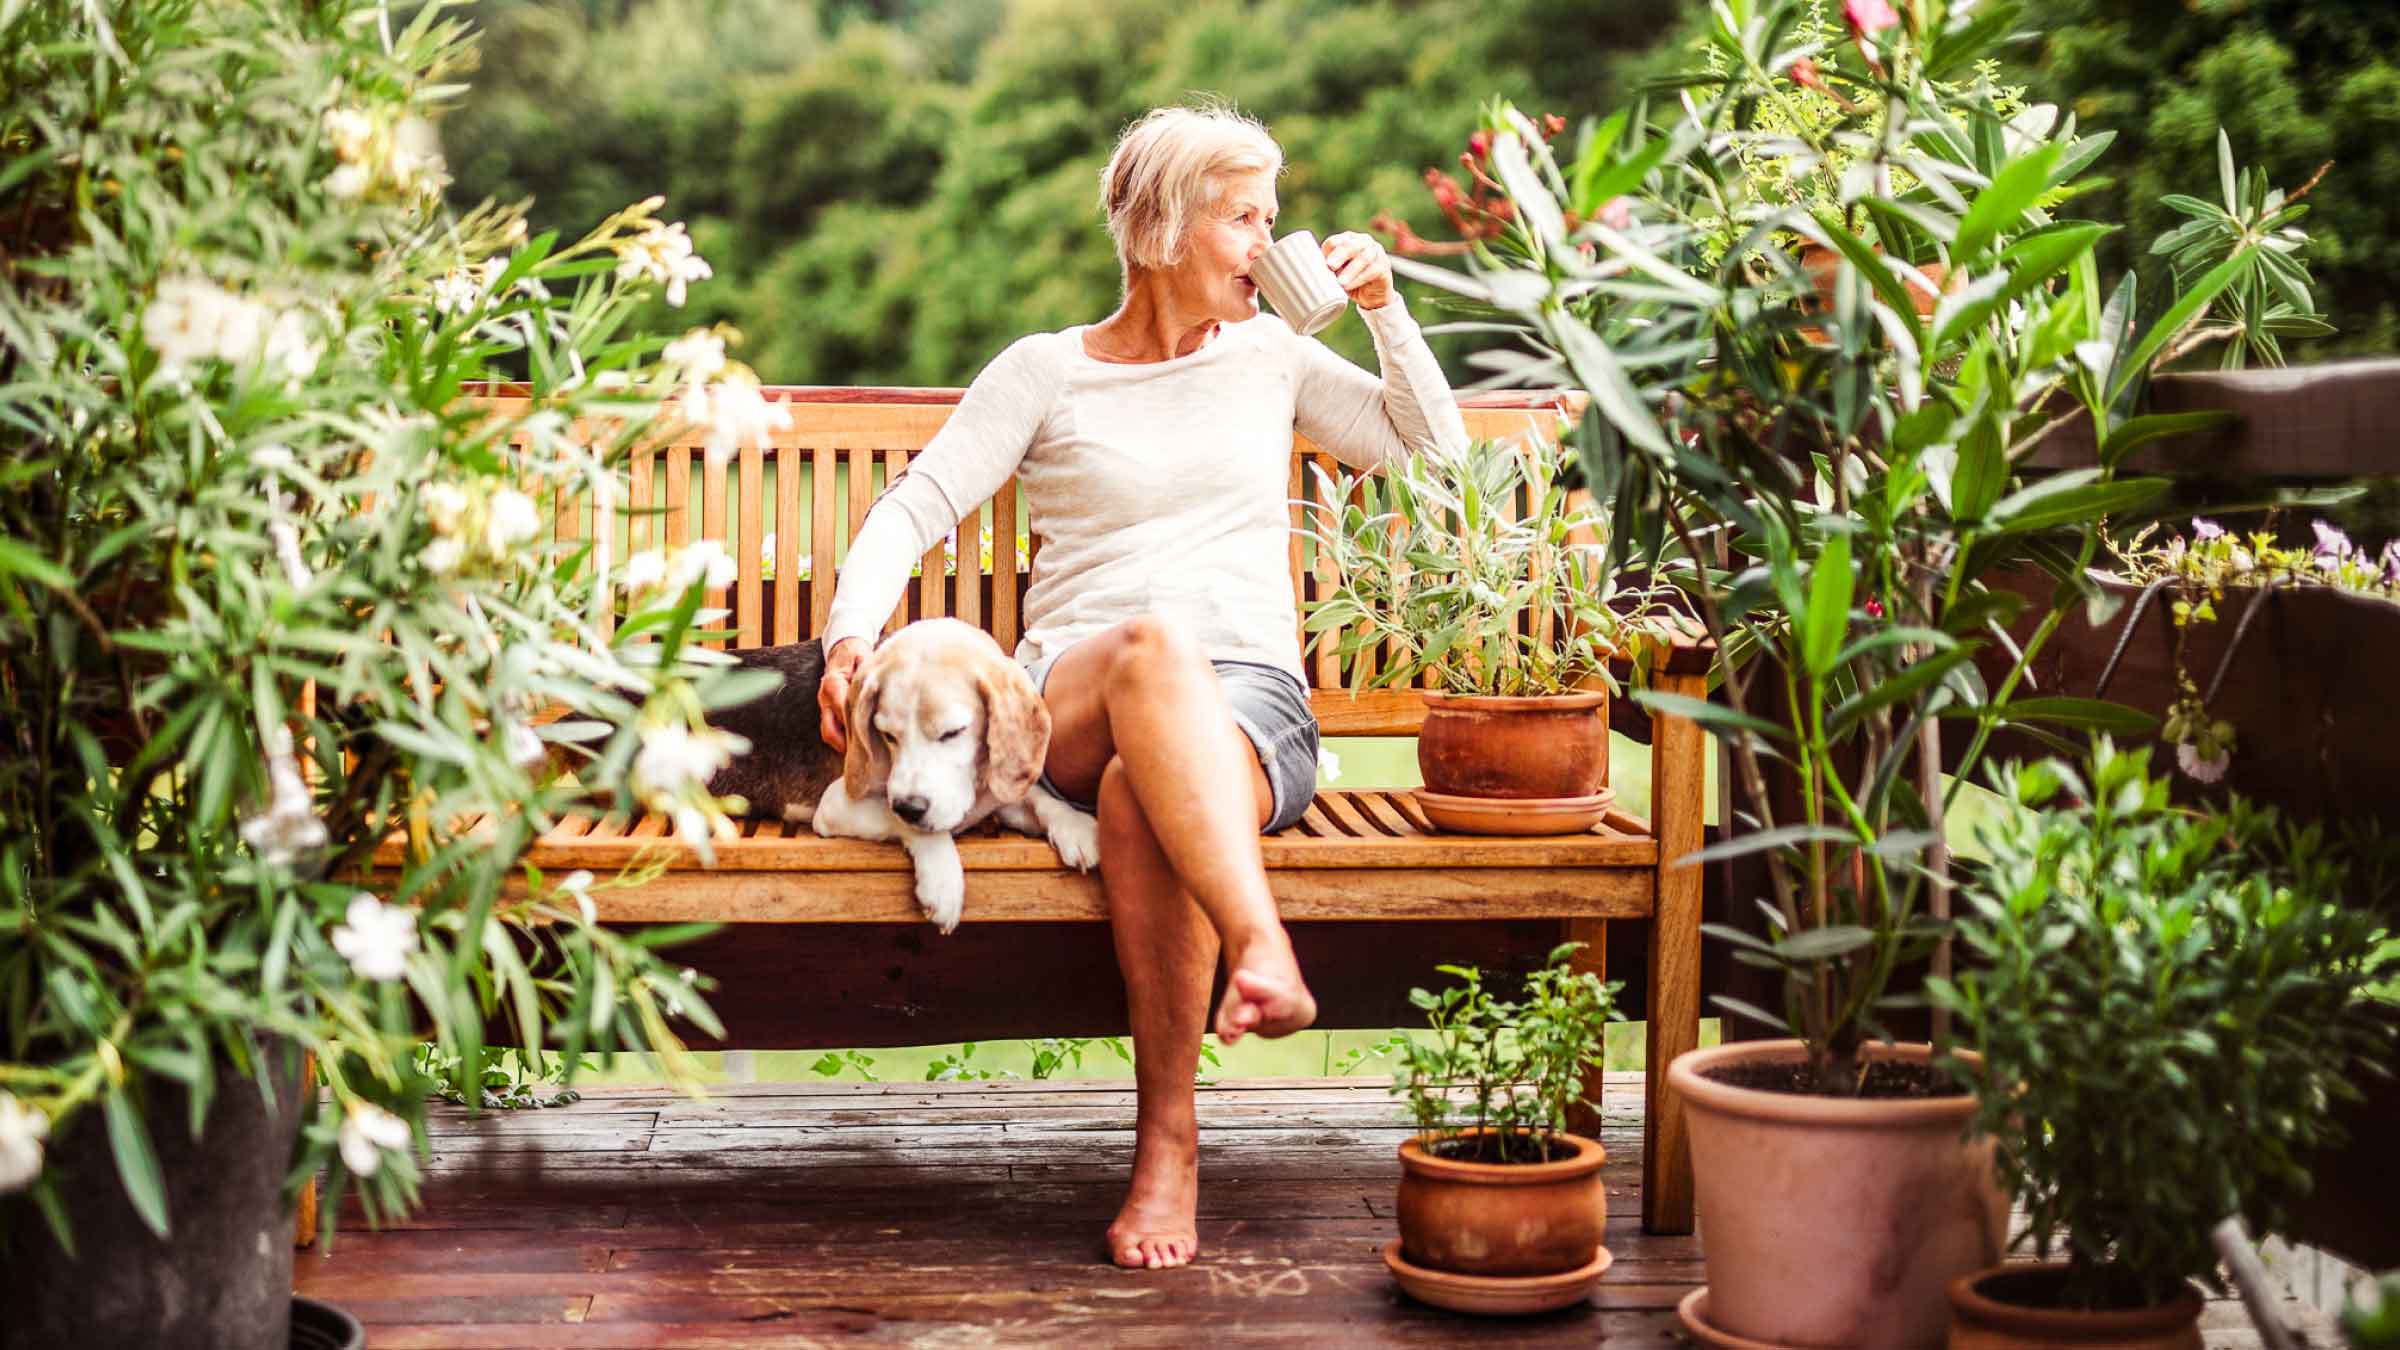 Woman sits on her outdoor bench surrounded by plants and trees, whilst sipping from a mug, and patting her sleepy dog by her side.